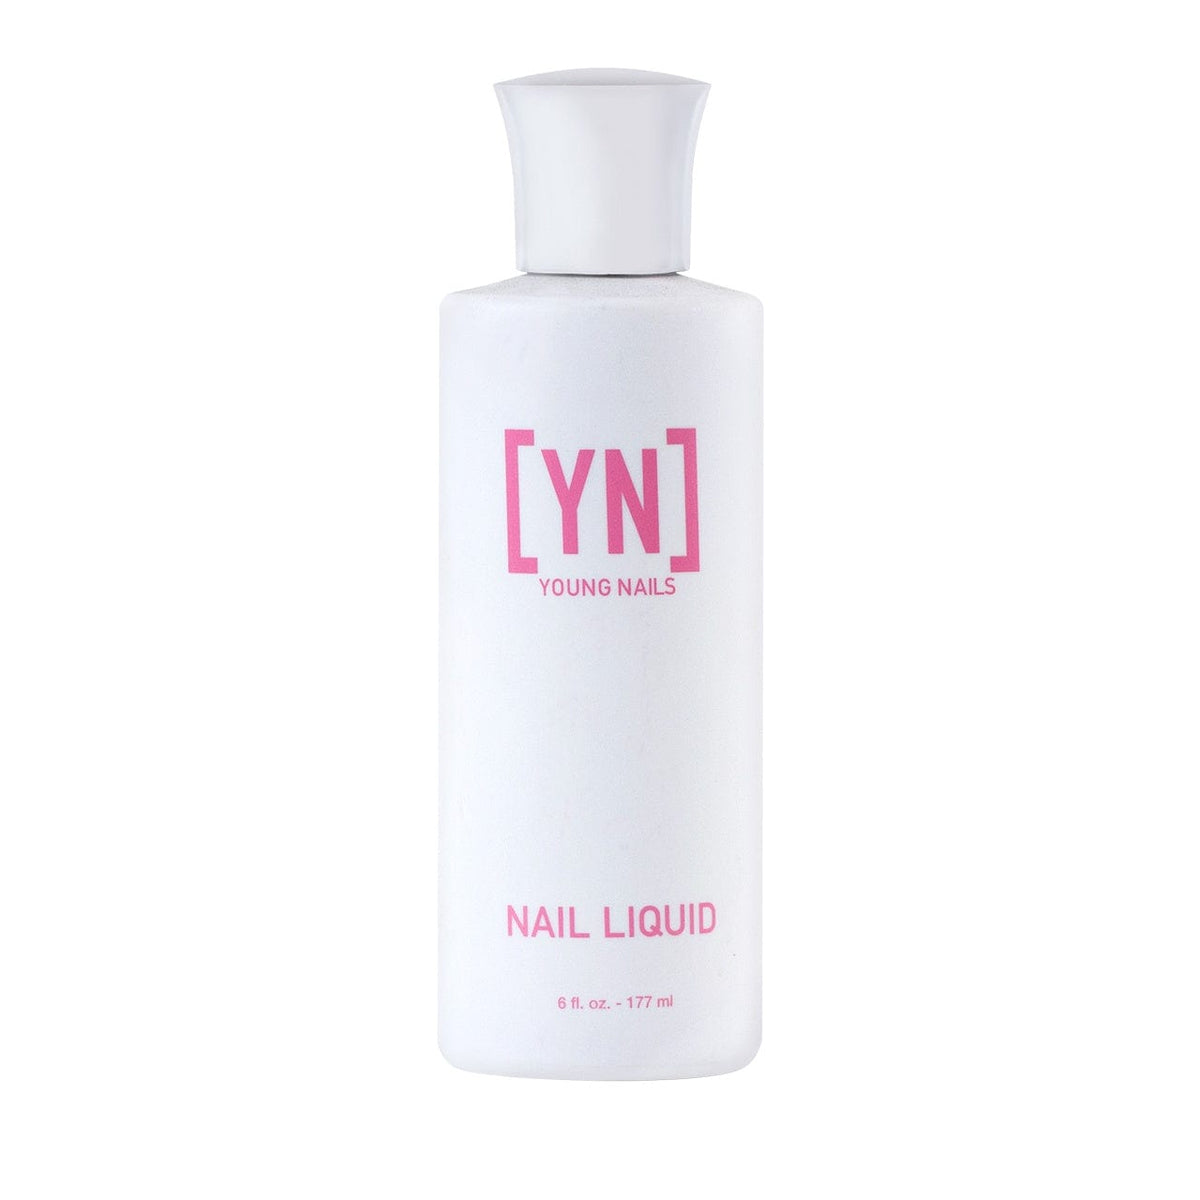 177ml Nail Liquid Nails - Young Nails - Luxe Pacifique